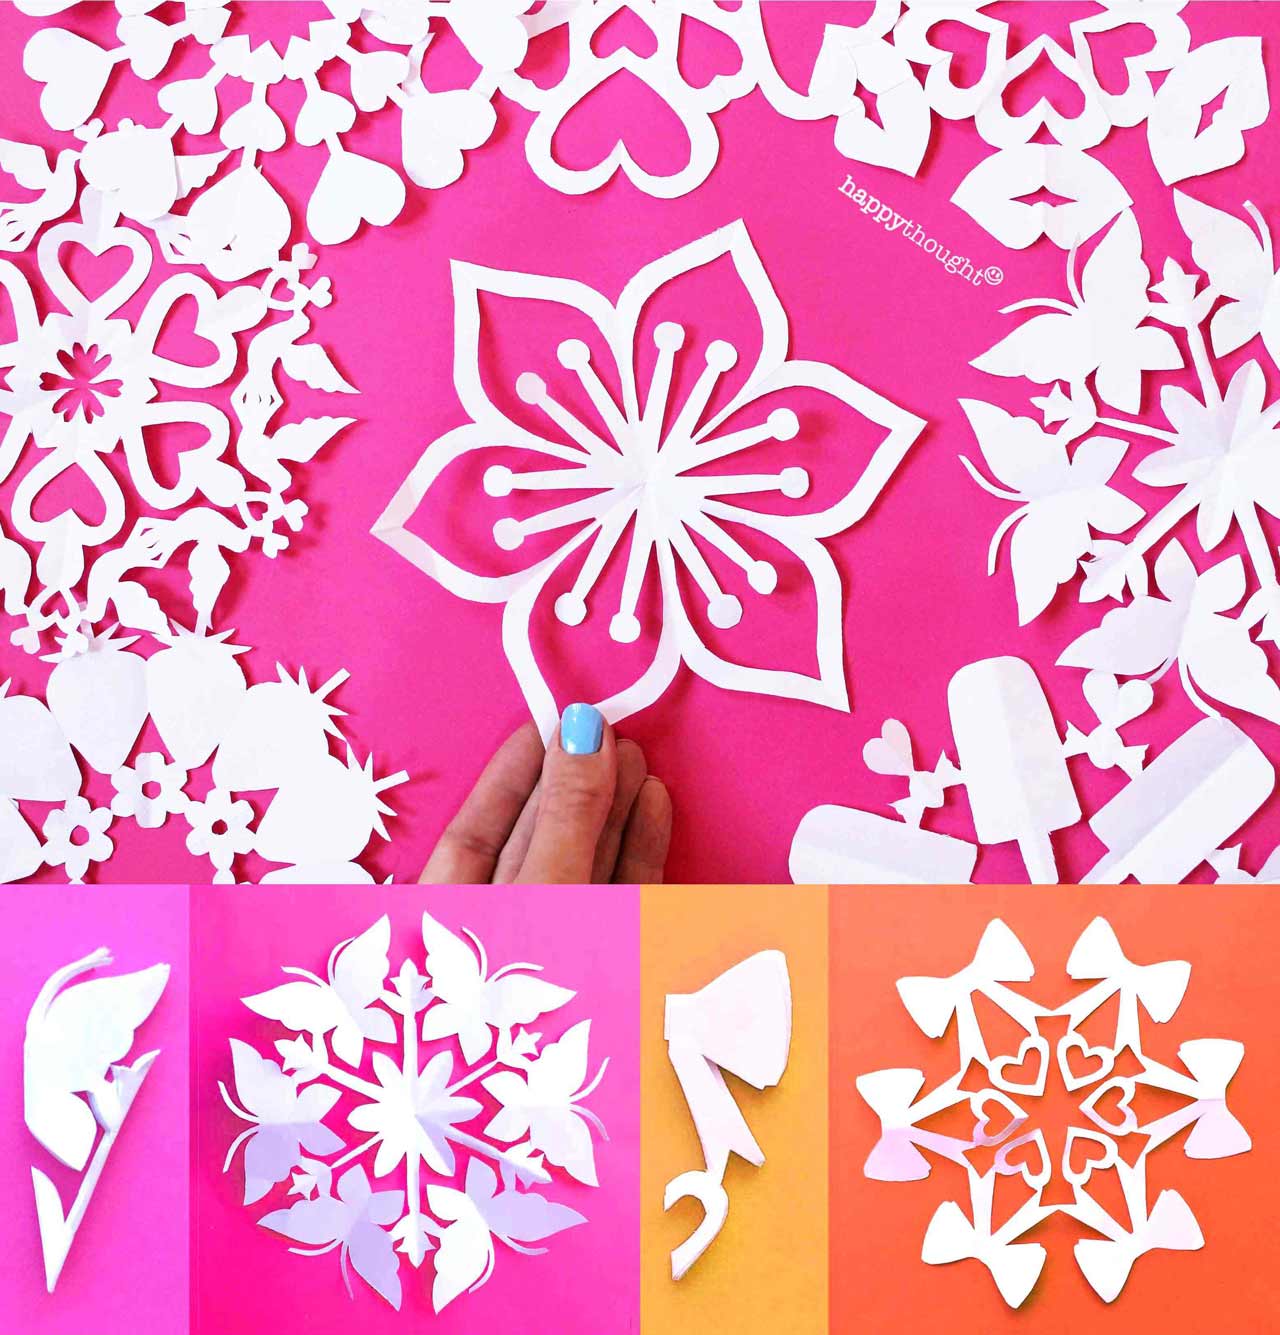 Make valentines full of joy with these beautiful paper snowflake decorations